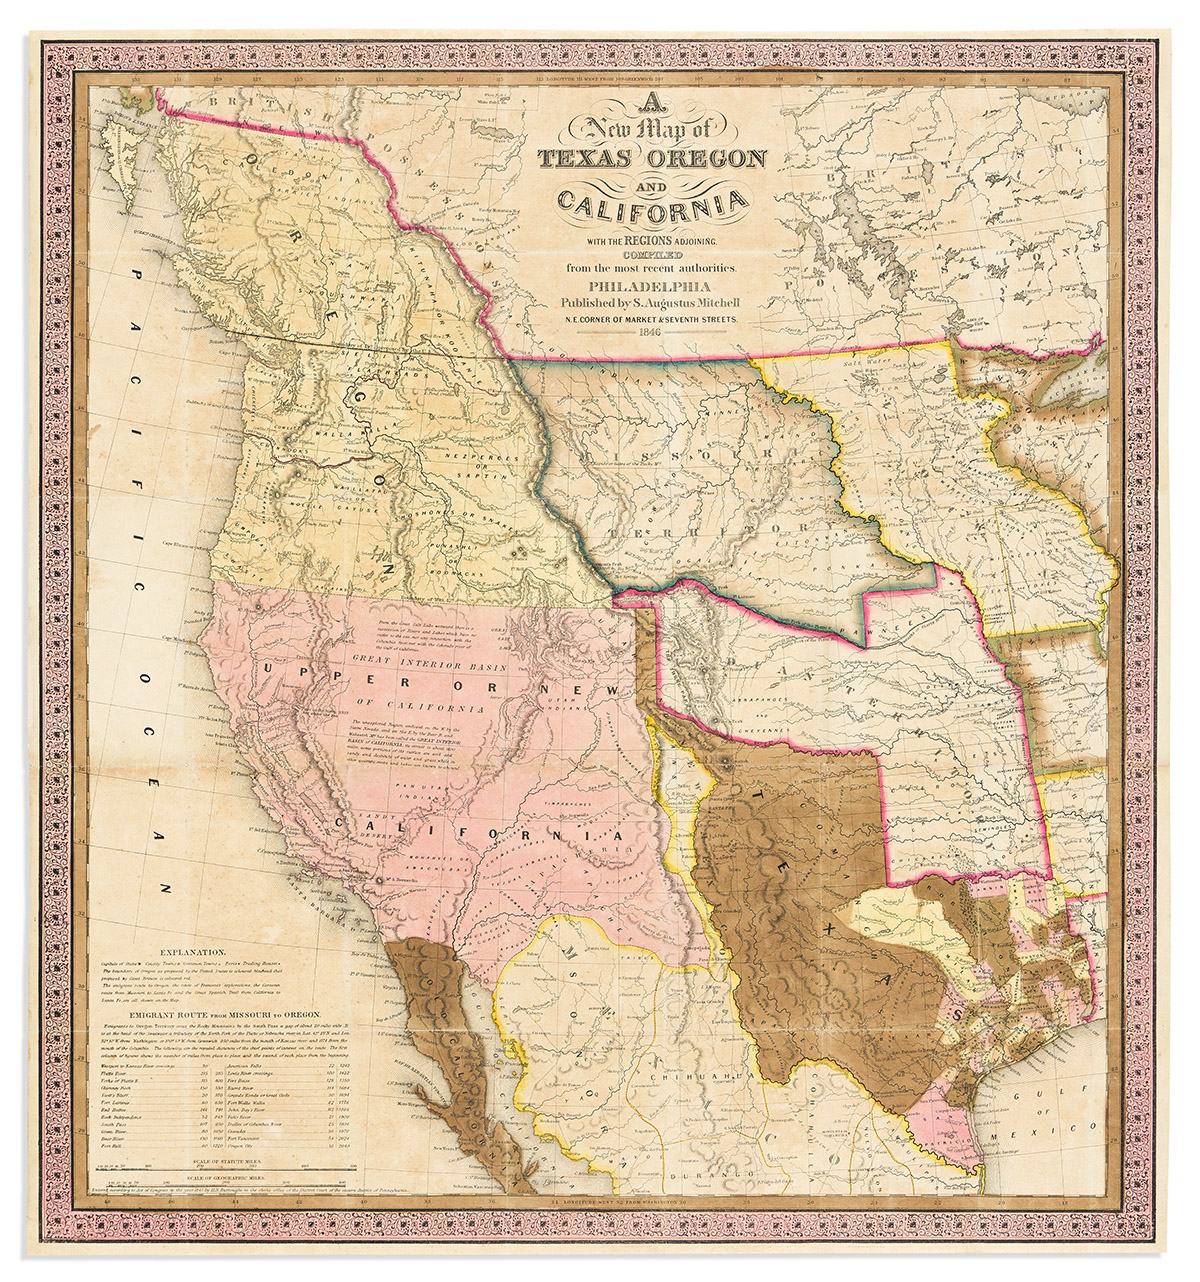 (AMERICAN WEST.) Samuel Augustus Mitchell. A New Map of Texas, Oregon and California with the Regions Adjoining.